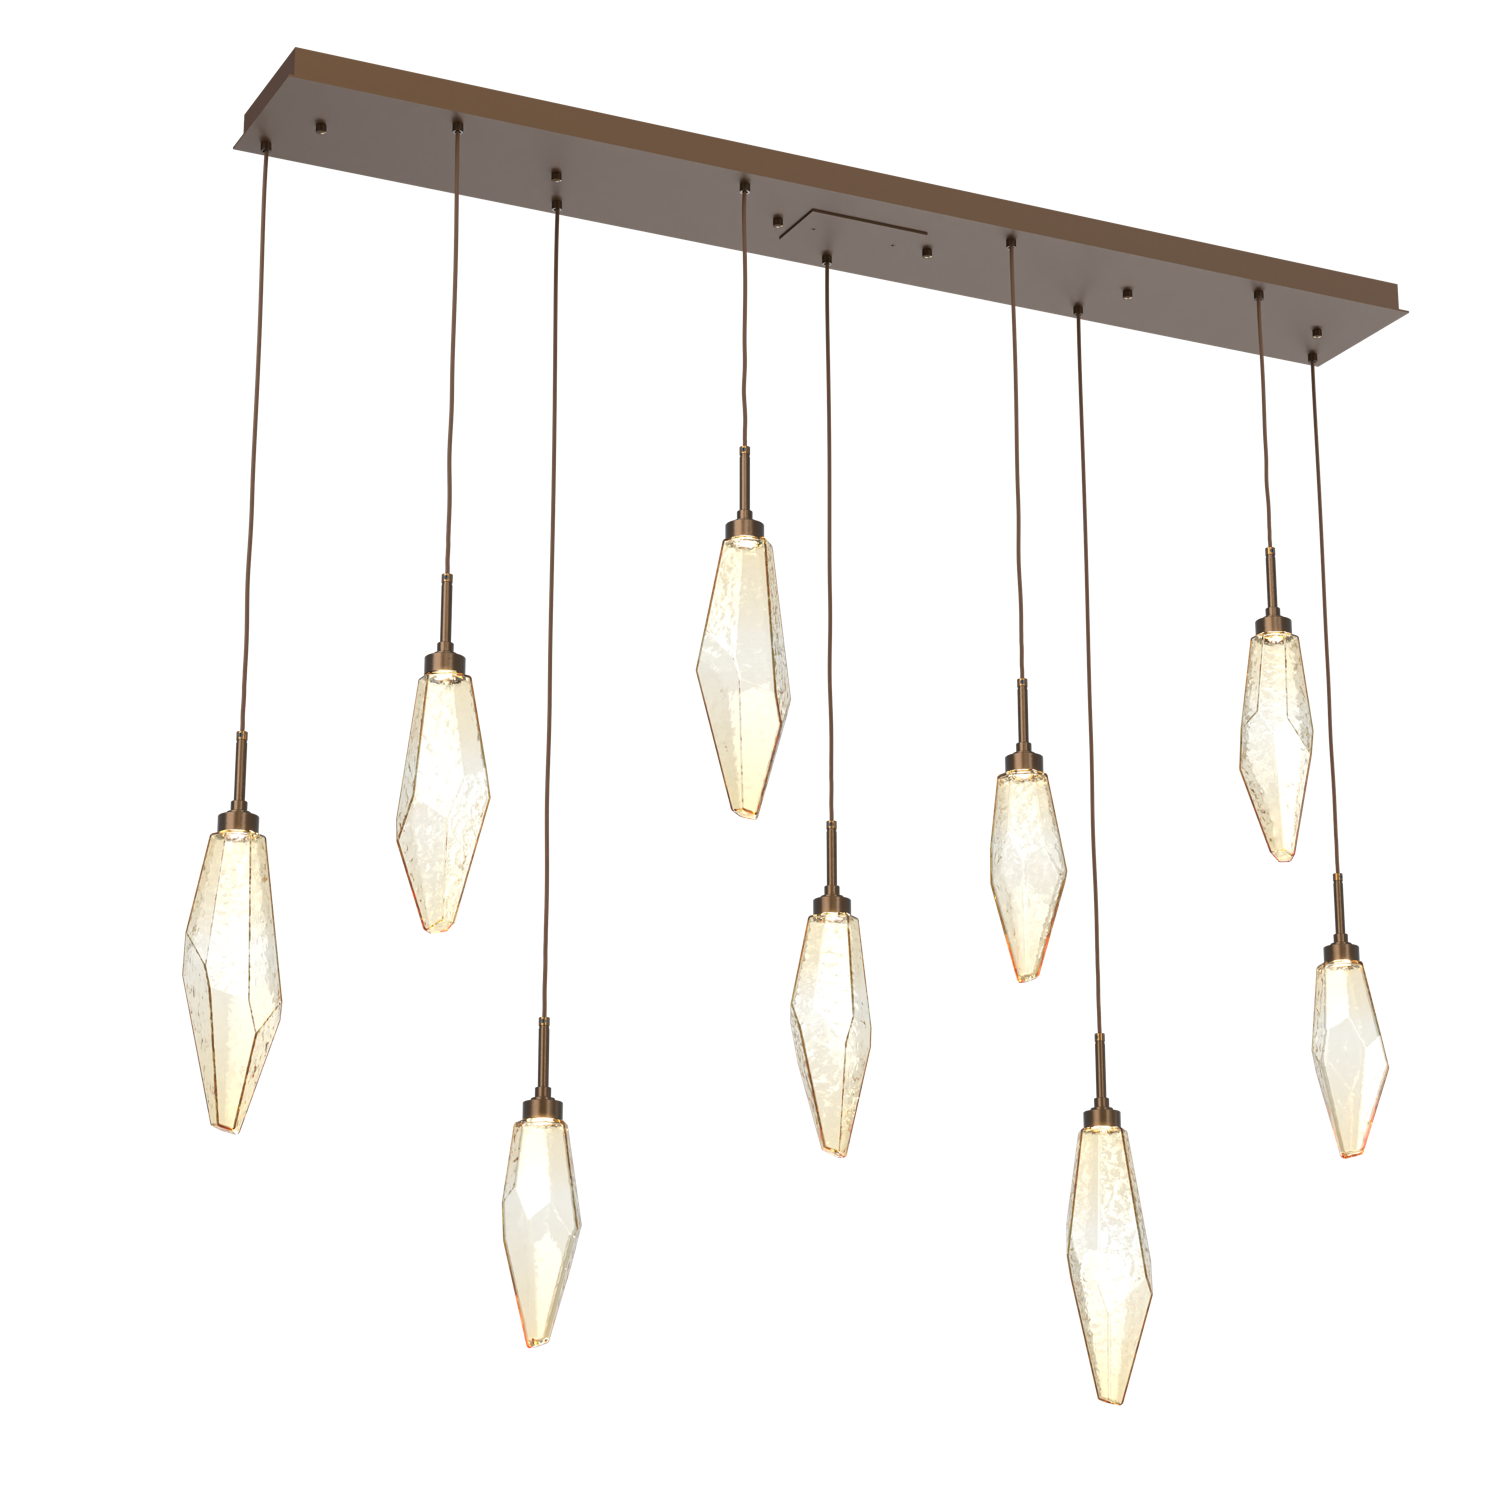 PLB0050-09-FB-CA-Hammerton-Studio-Rock-Crystal-9-light-linear-pendant-chandelier-with-flat-bronze-finish-and-chilled-amber-blown-glass-shades-and-LED-lamping